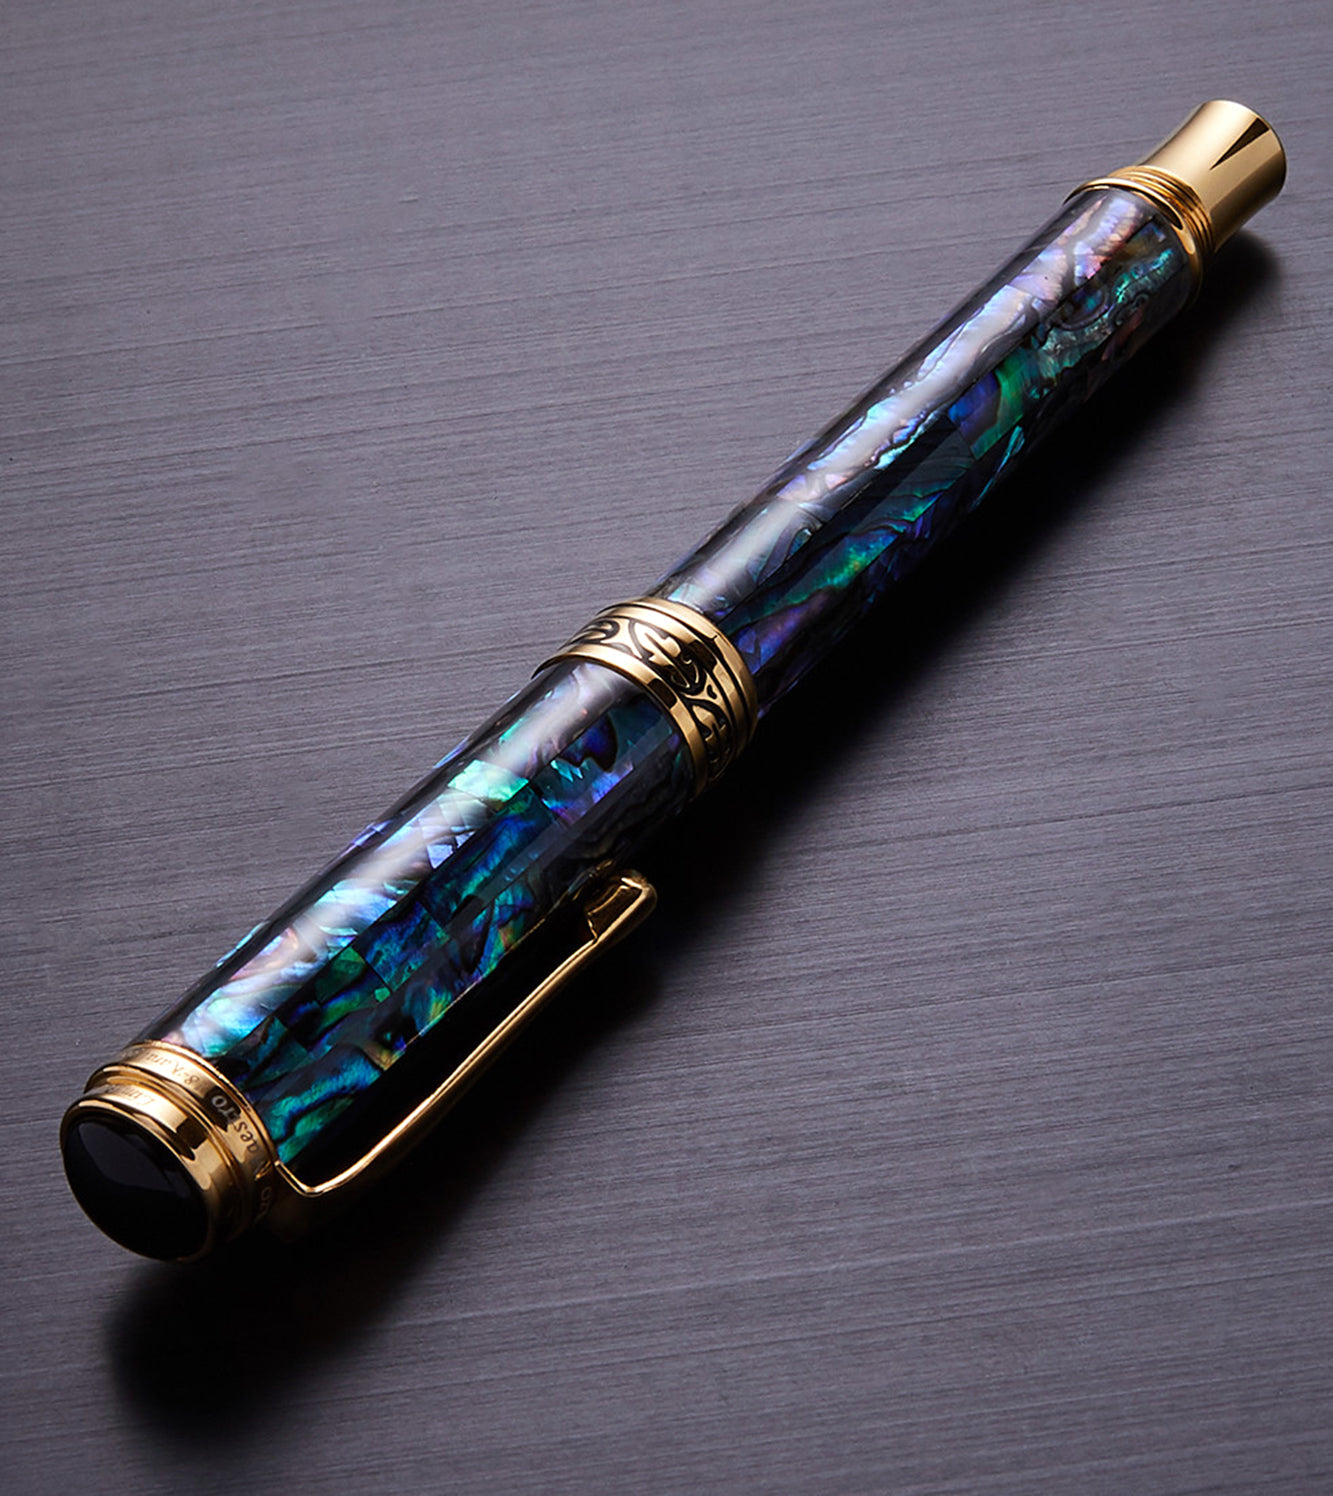 Xezo - Angled 3D view of the back of the capped Maestro Sea Shell RPG-1 rollerball pen